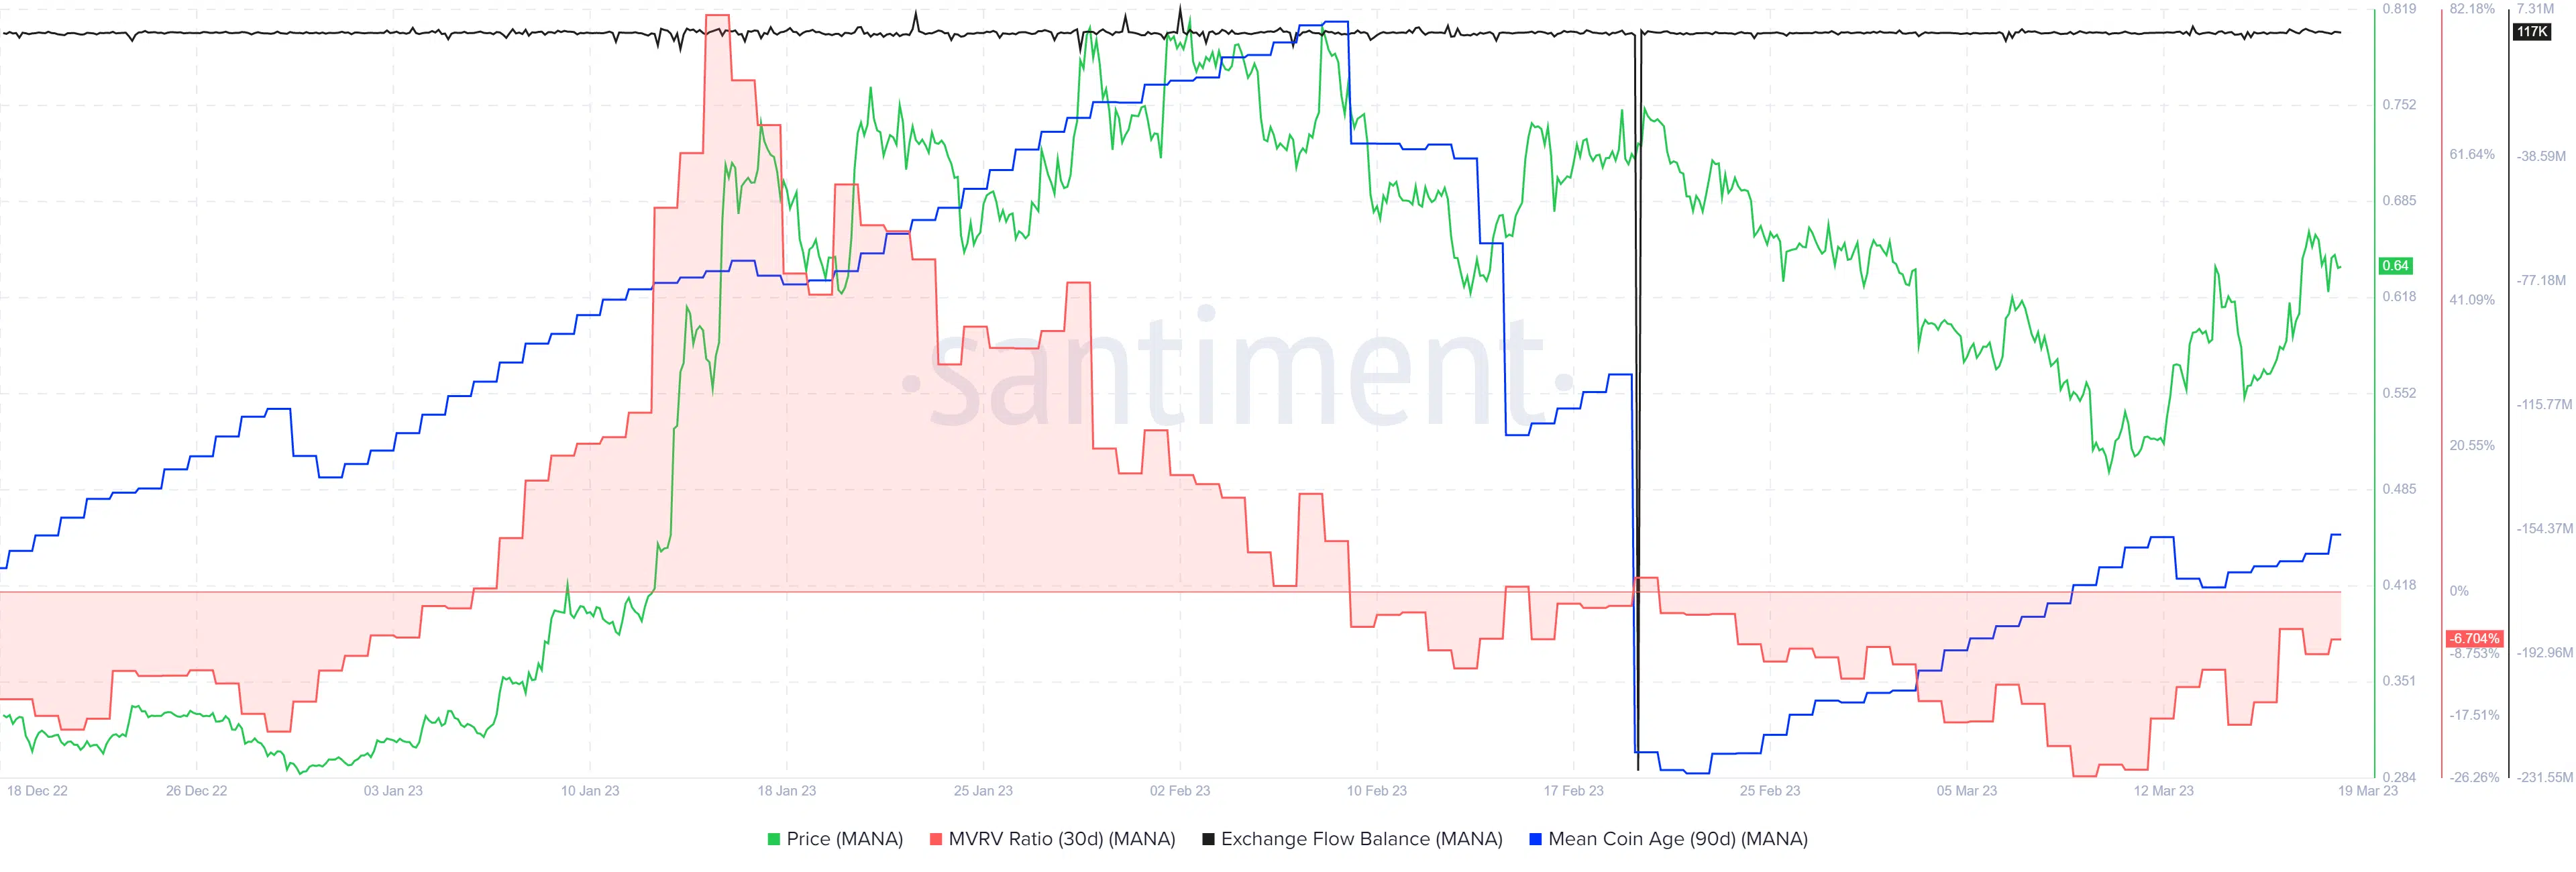 Decentraland was headed toward more gains but the higher timeframe bias was bearish